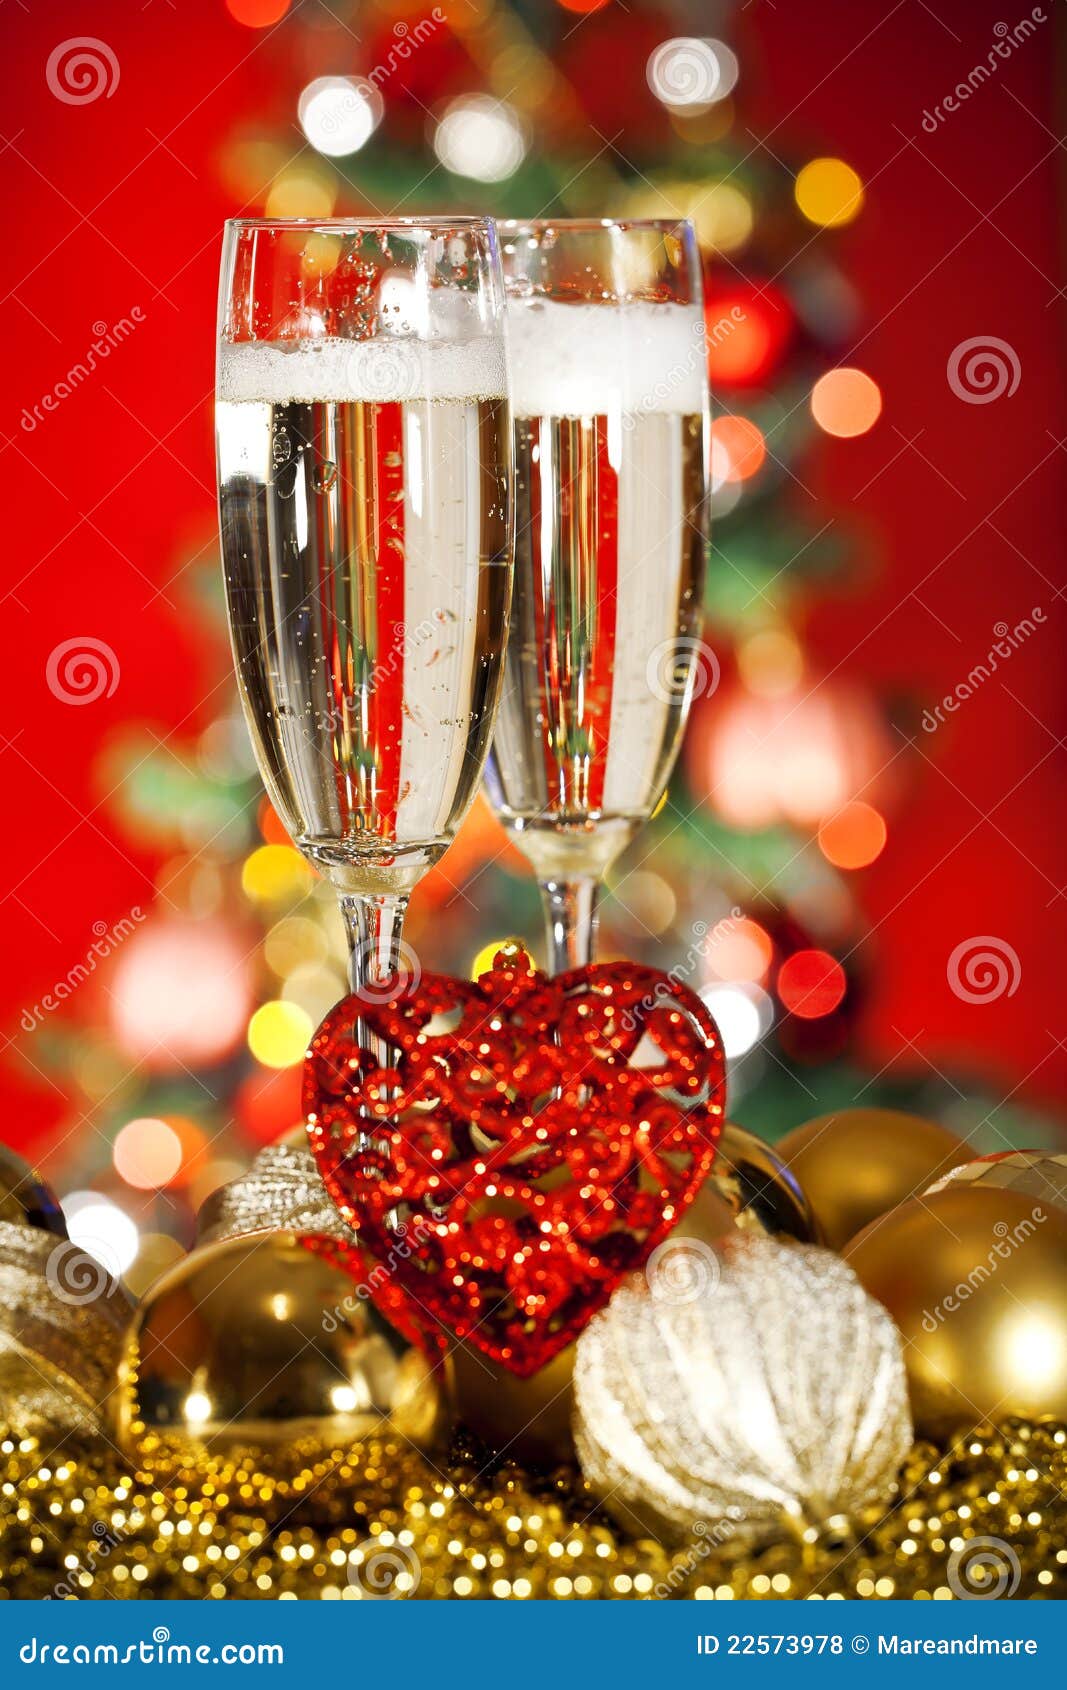 Christmas Decorations And Champagne Glass Stock Photo - Image of champagne, color: 22573978